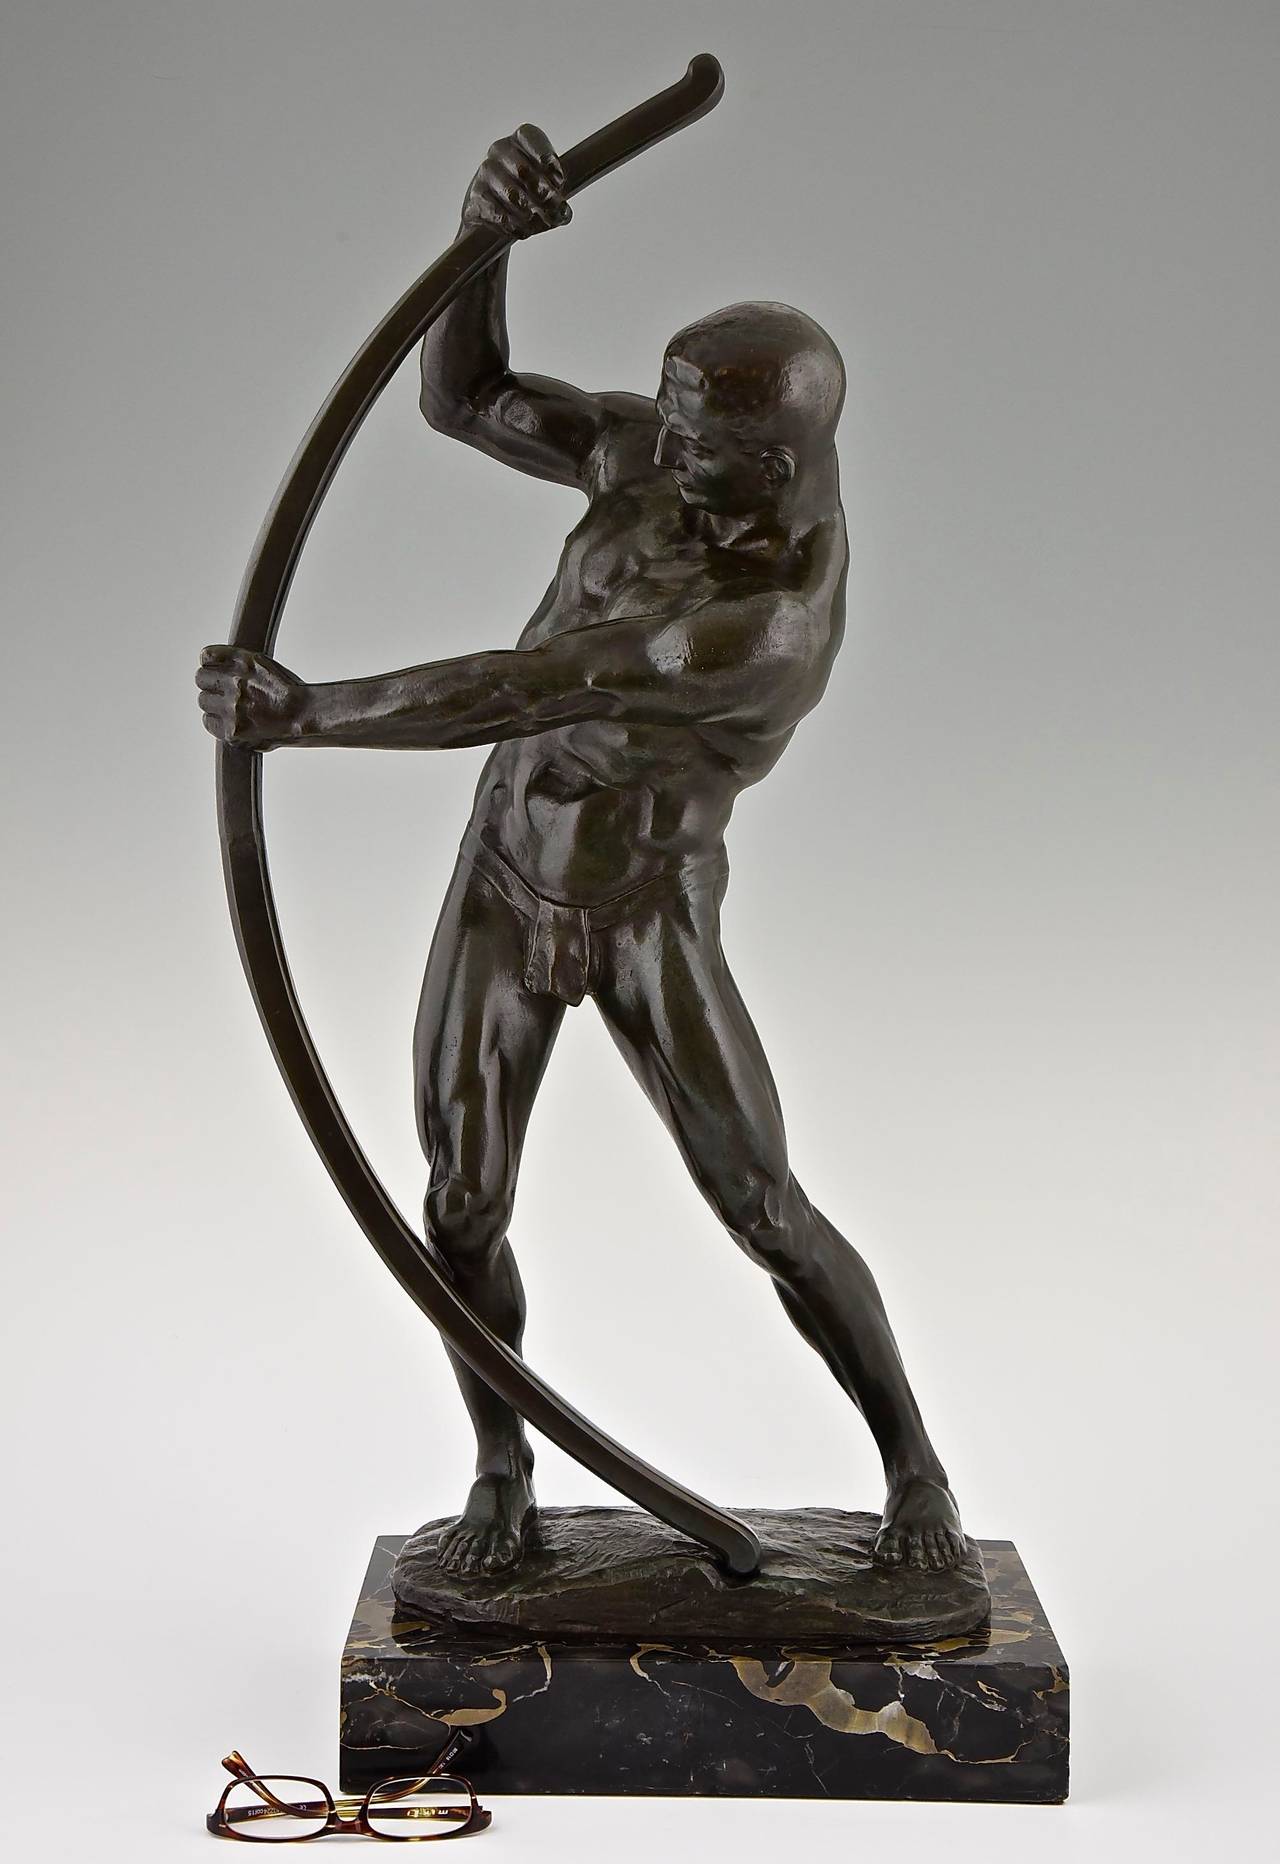 Description:  Sculpture of a male nude with a bow. 
Artist: Adolf Muller Crefeld (German, 1863-1934).
Signature: Muller Crefeld, Berlin.
Style:  Art Deco. 
Date: 1920. 
Material: Patinated bronze (very dark green, almost black)  marble base.